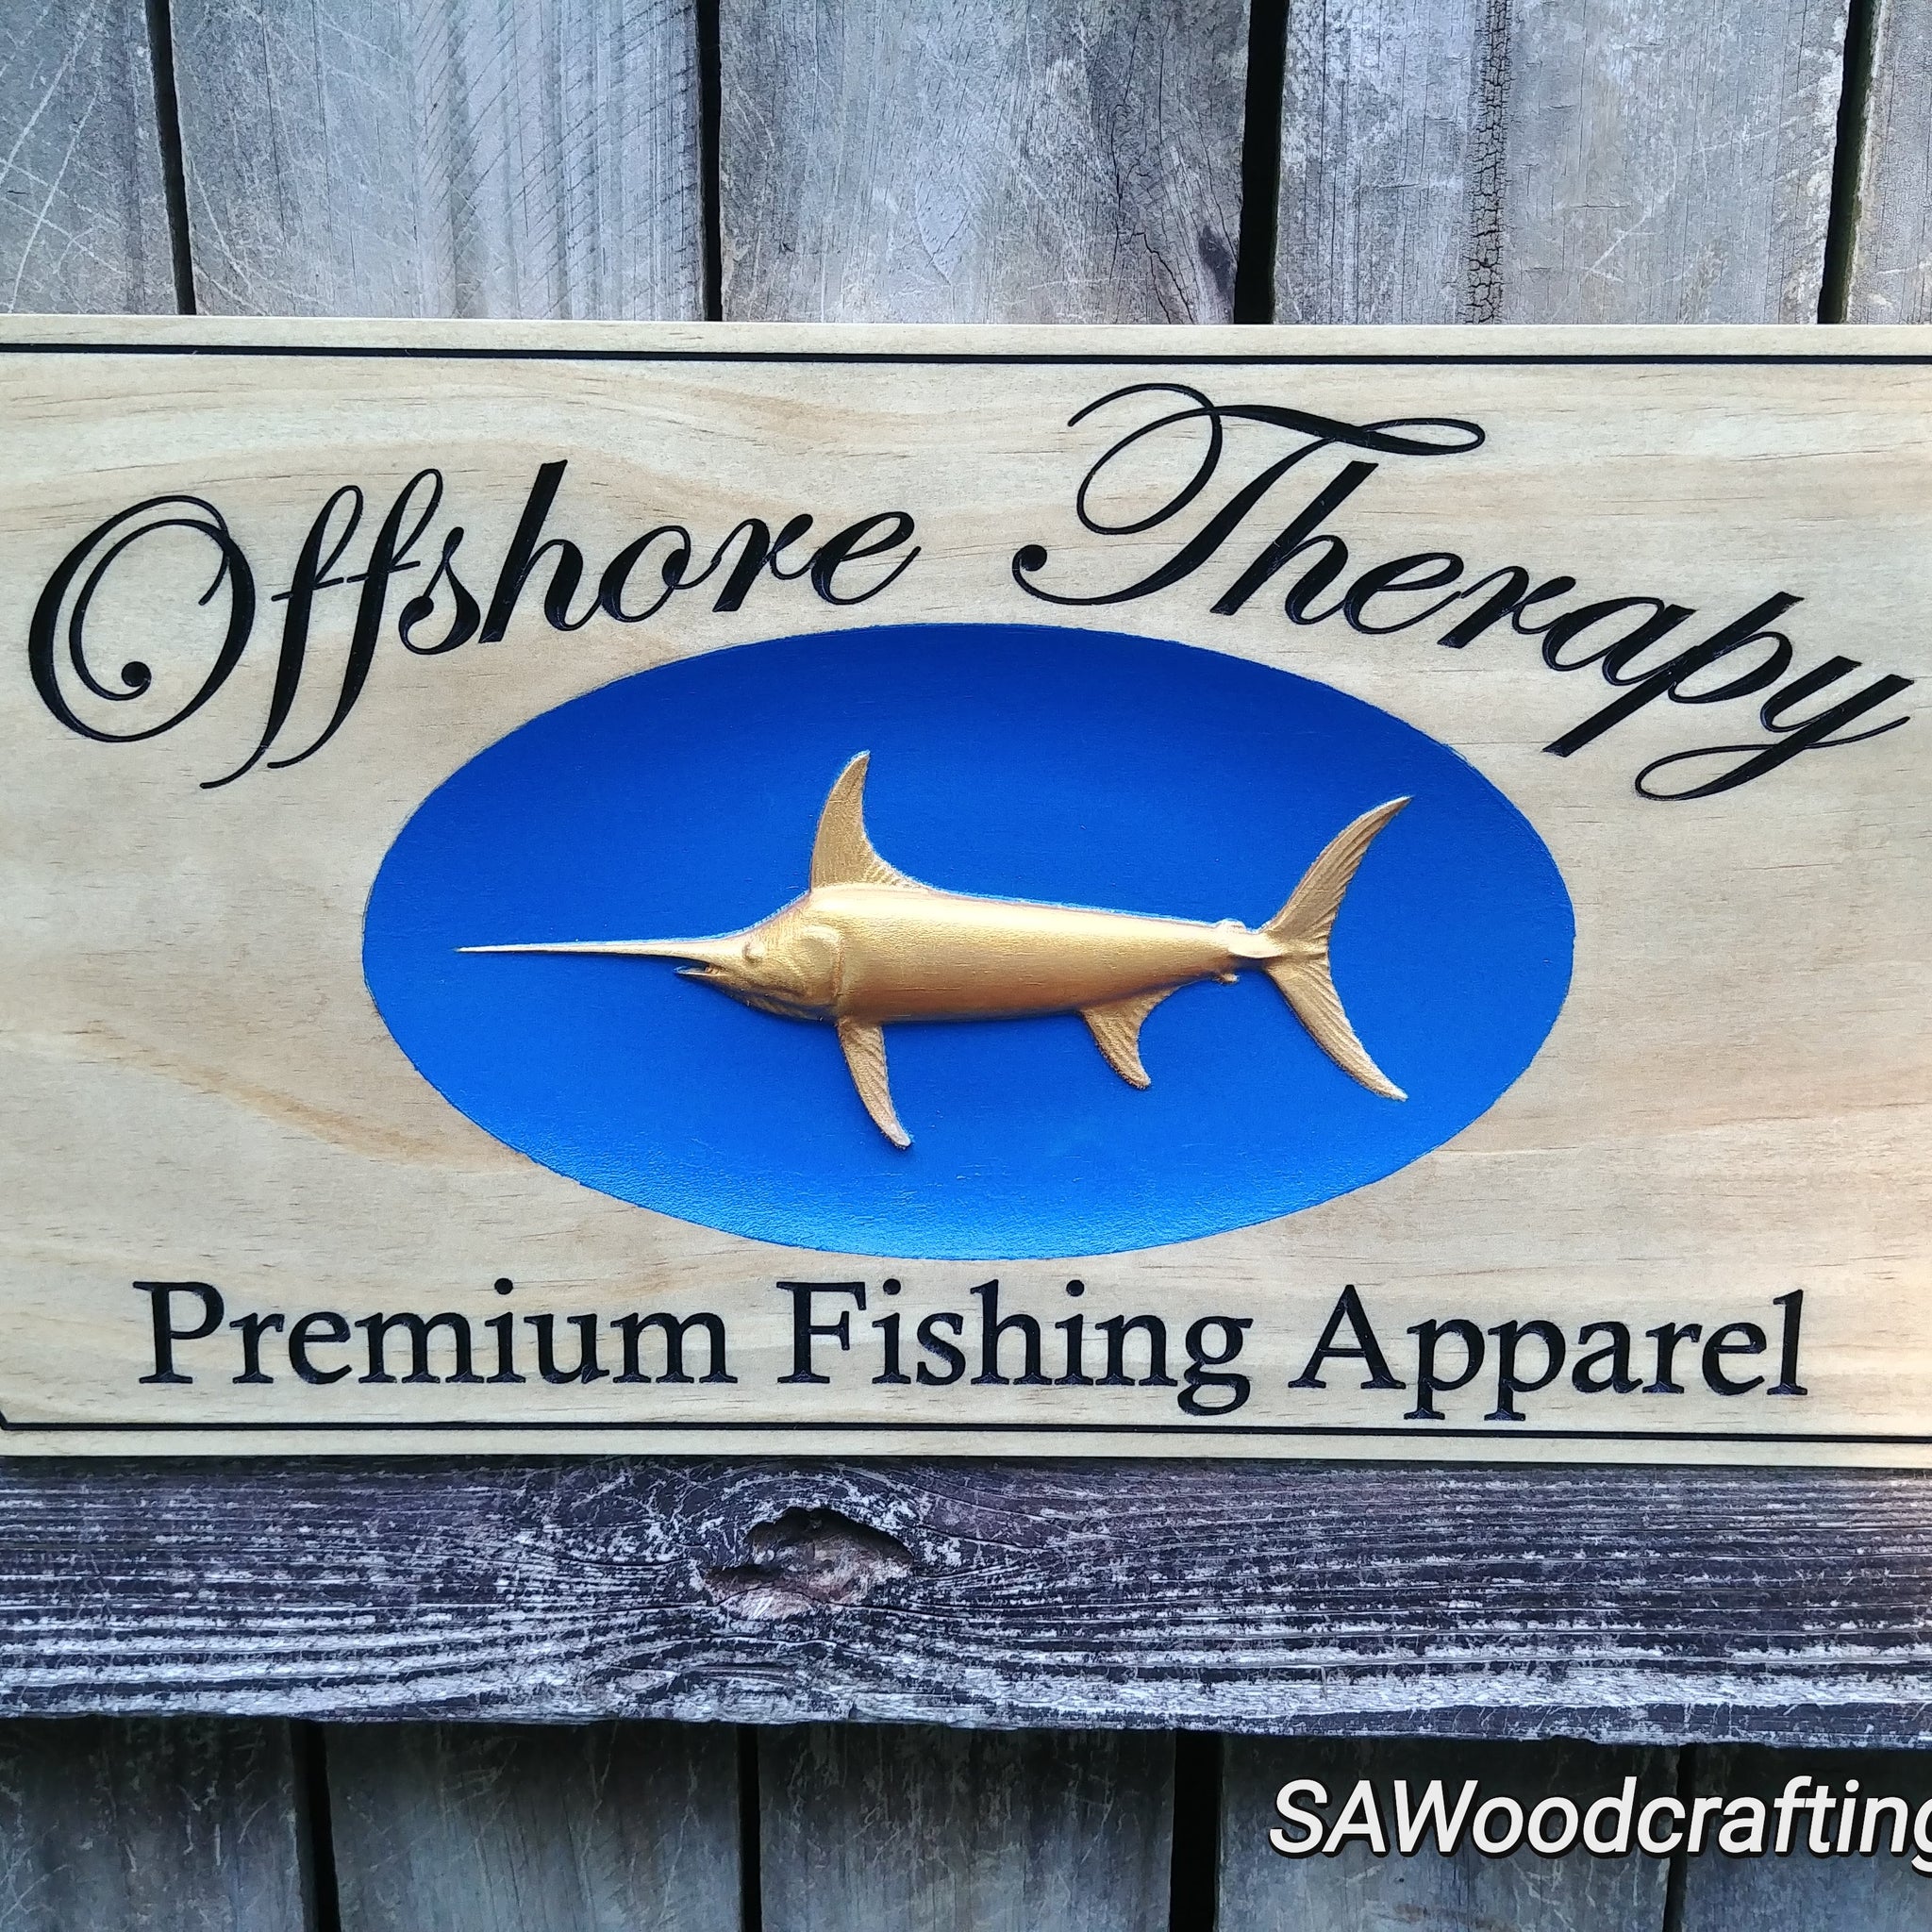 Custom 3D wood carved signs, hand painted 3d graphic centerpiece carved into select pine wood